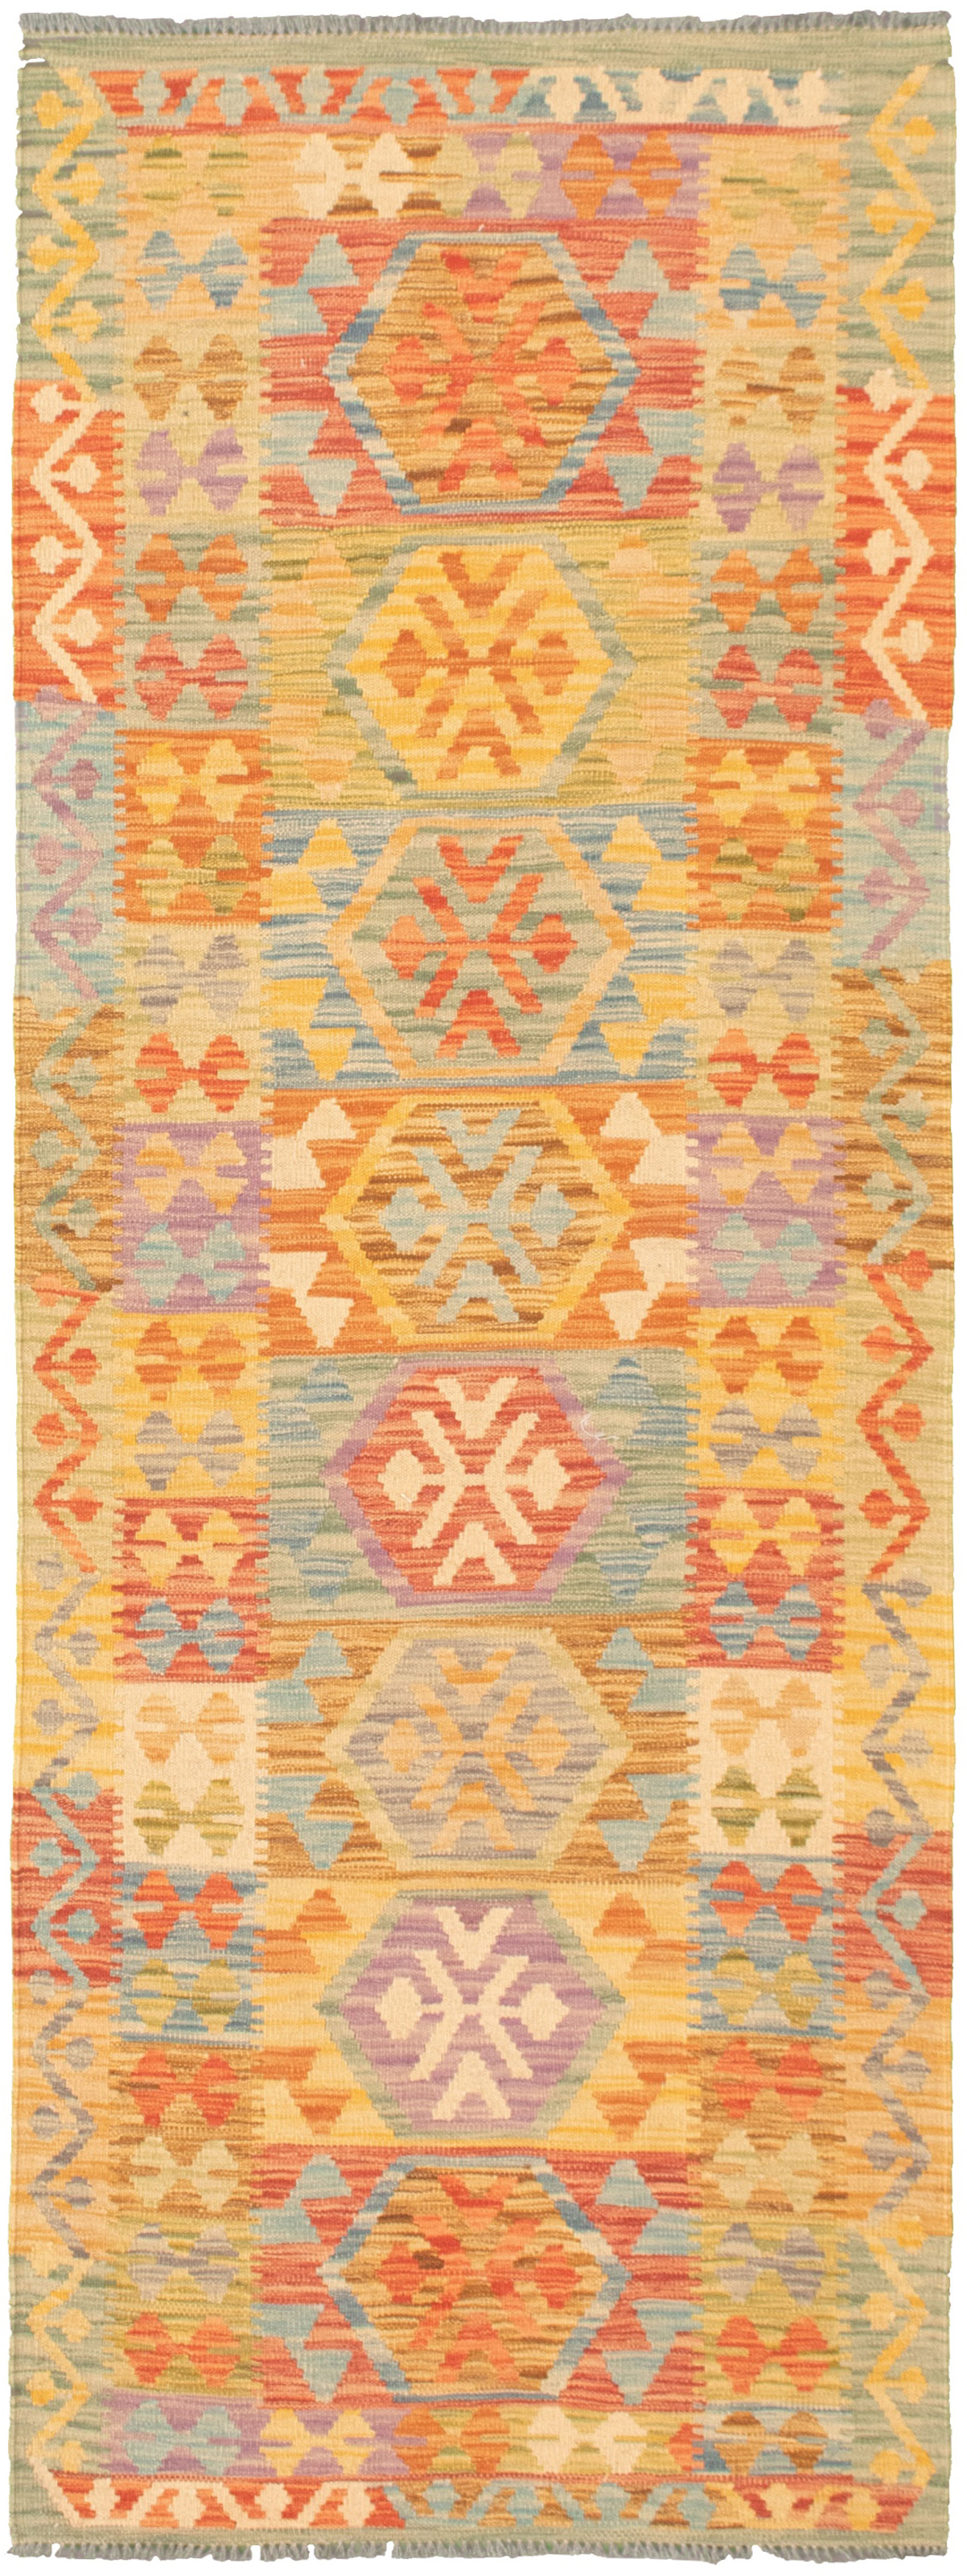 Hand woven Bold and Colorful  Light Yellow  Kilim 2'10" x 8'0" Size: 2'10" x 8'0"  